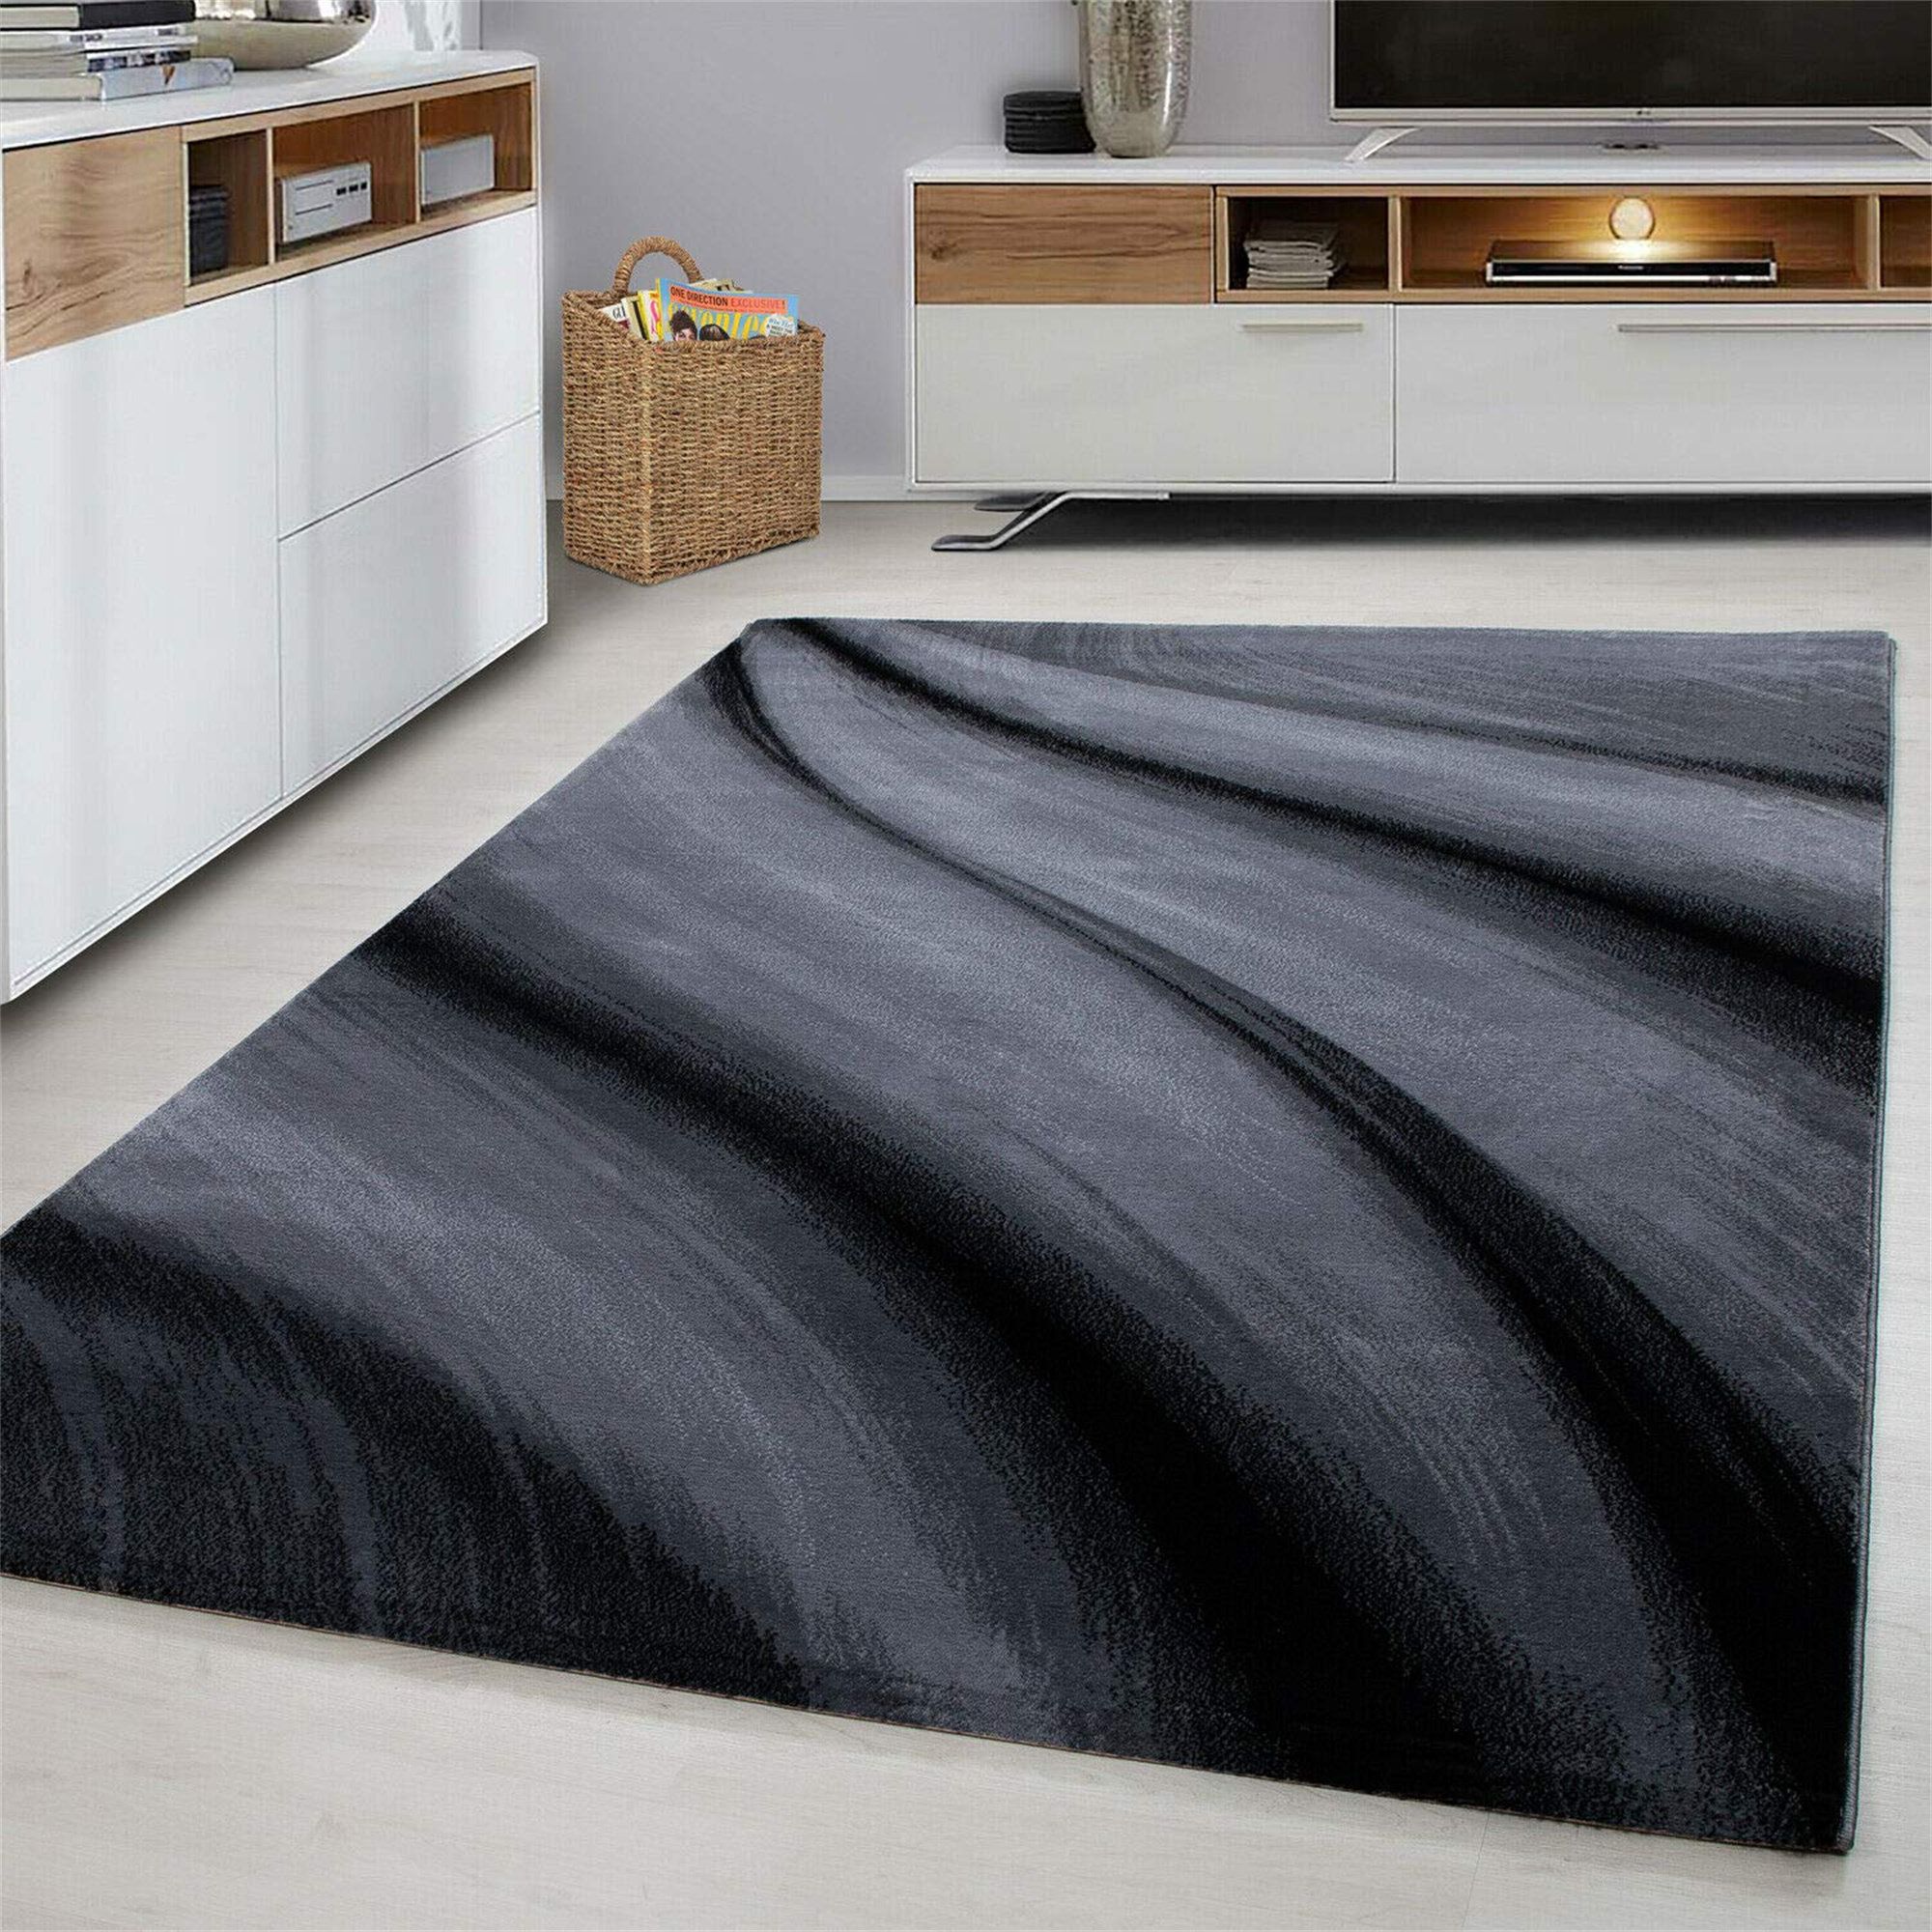 Ivy Bronx Modern Design Black Grey Charcoal Rugs Living Room Extra Large  Size Soft Touch Short Pile Style Carpet Area Rugs Non Shedding (160cm X  220cm (5.5ft X 7.2ft)) | Wayfair.co (View 12 of 15)